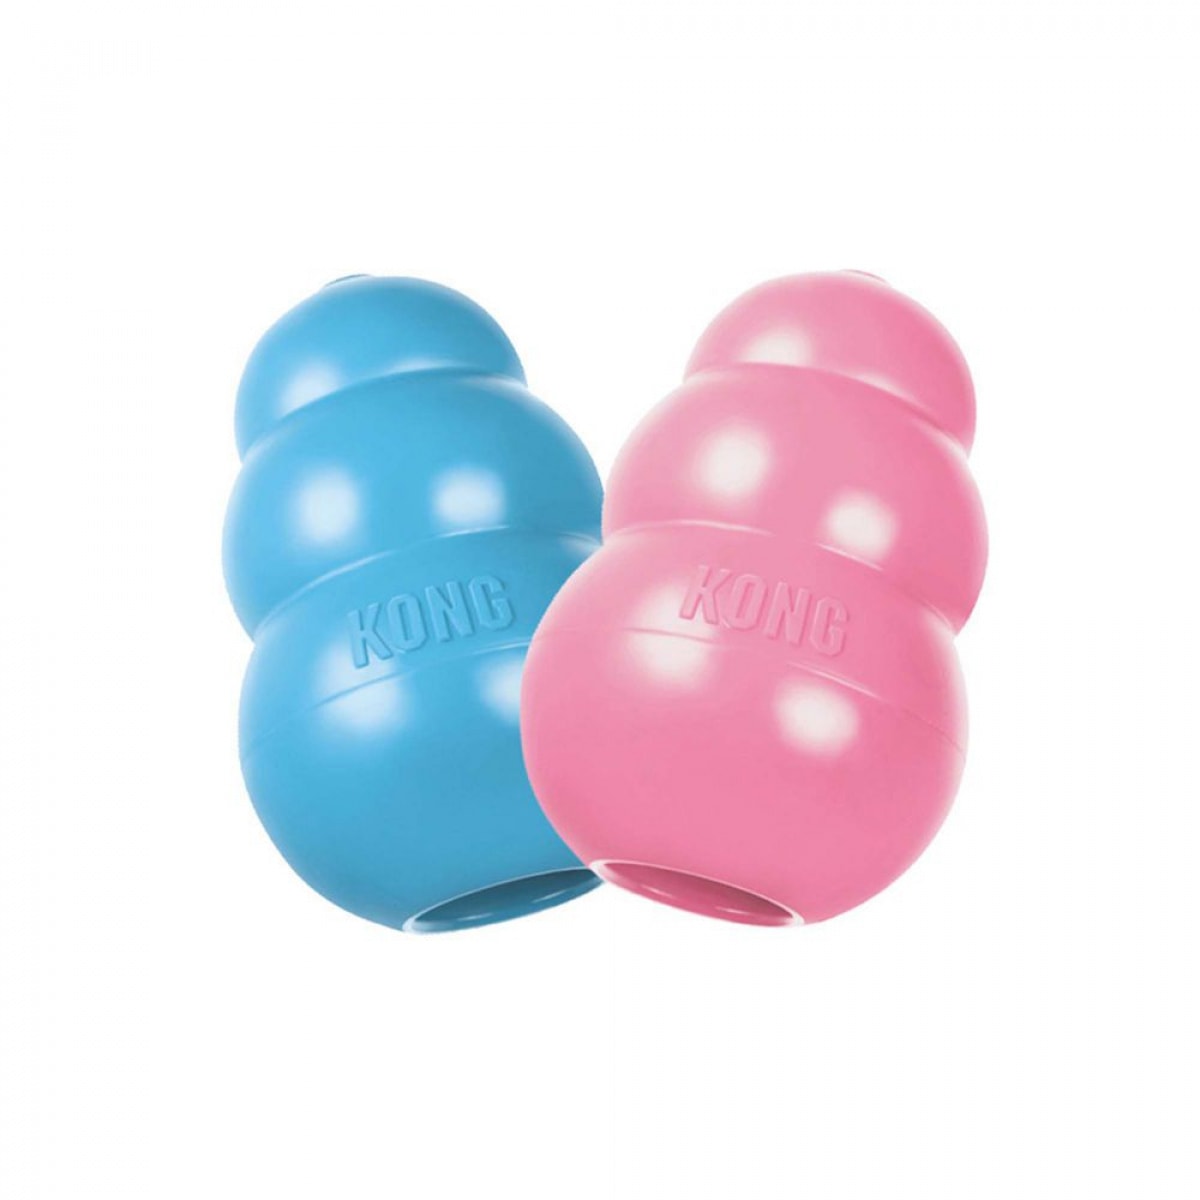 Kong – Puppy Large – Pawfect Supplies Ltd Product Image